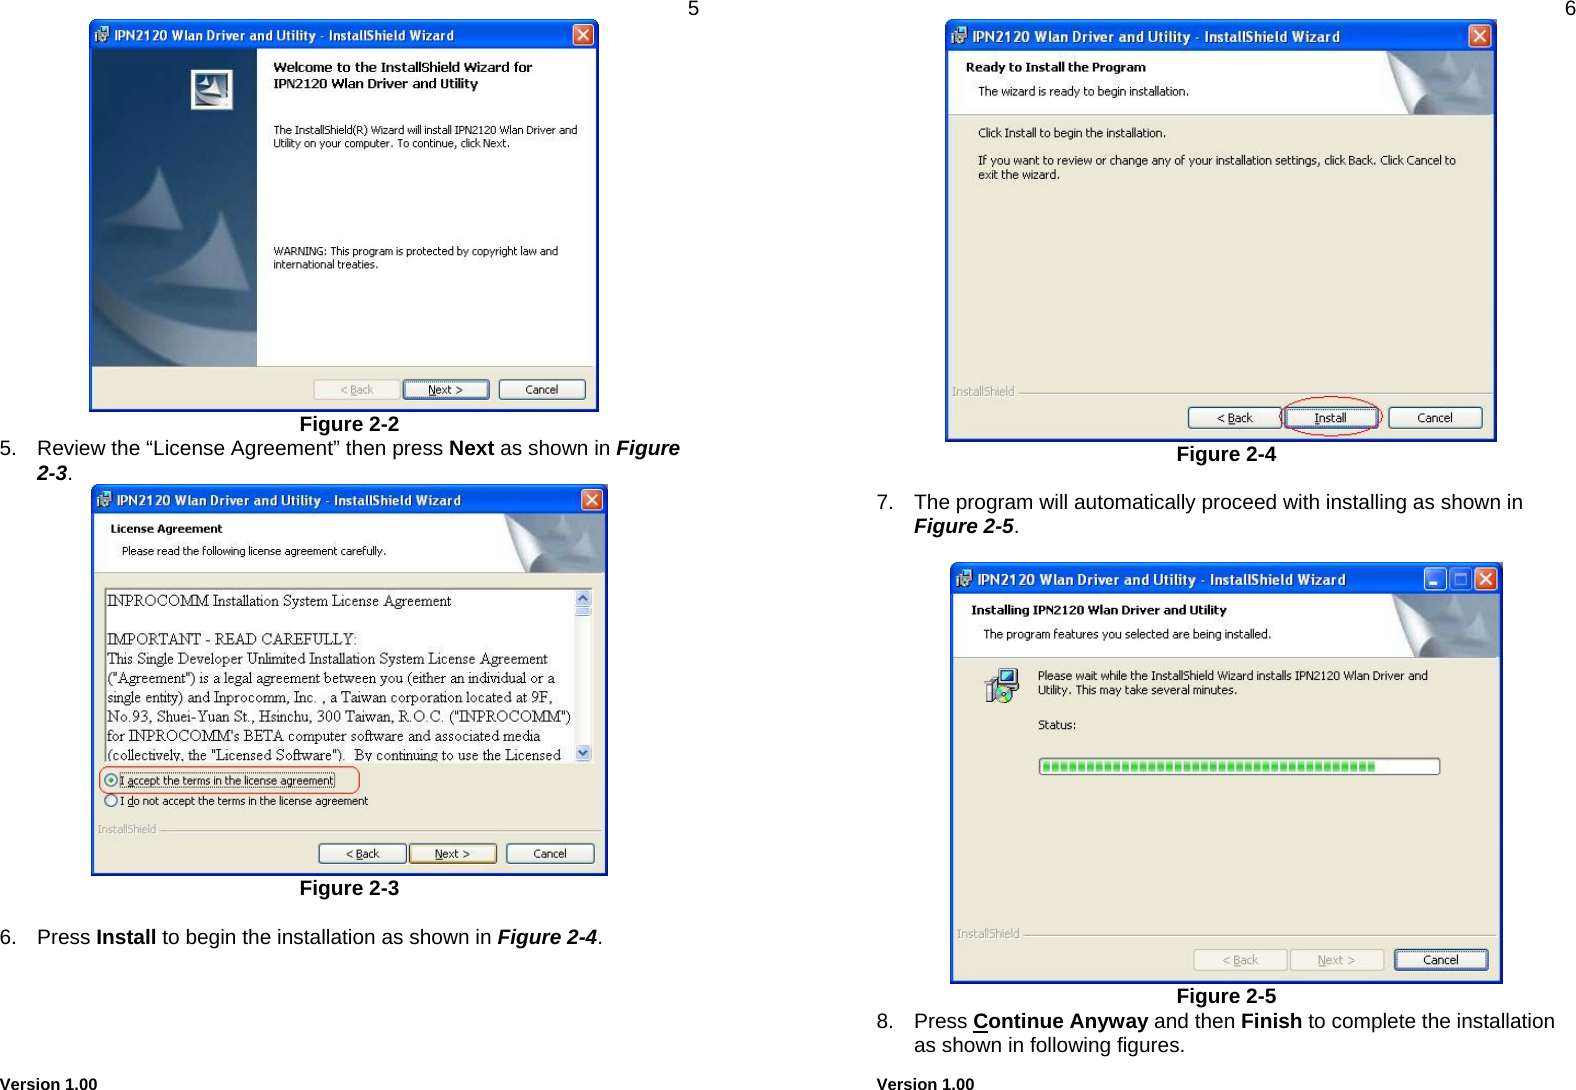  Version 1.00 5  Figure 2-2 5.  Review the “License Agreement” then press Next as shown in Figure 2-3.  Figure 2-3  6. Press Install to begin the installation as shown in Figure 2-4.     Version 1.00 6  Figure 2-4  7.  The program will automatically proceed with installing as shown in Figure 2-5.   Figure 2-5 8. Press Continue Anyway and then Finish to complete the installation as shown in following figures. 